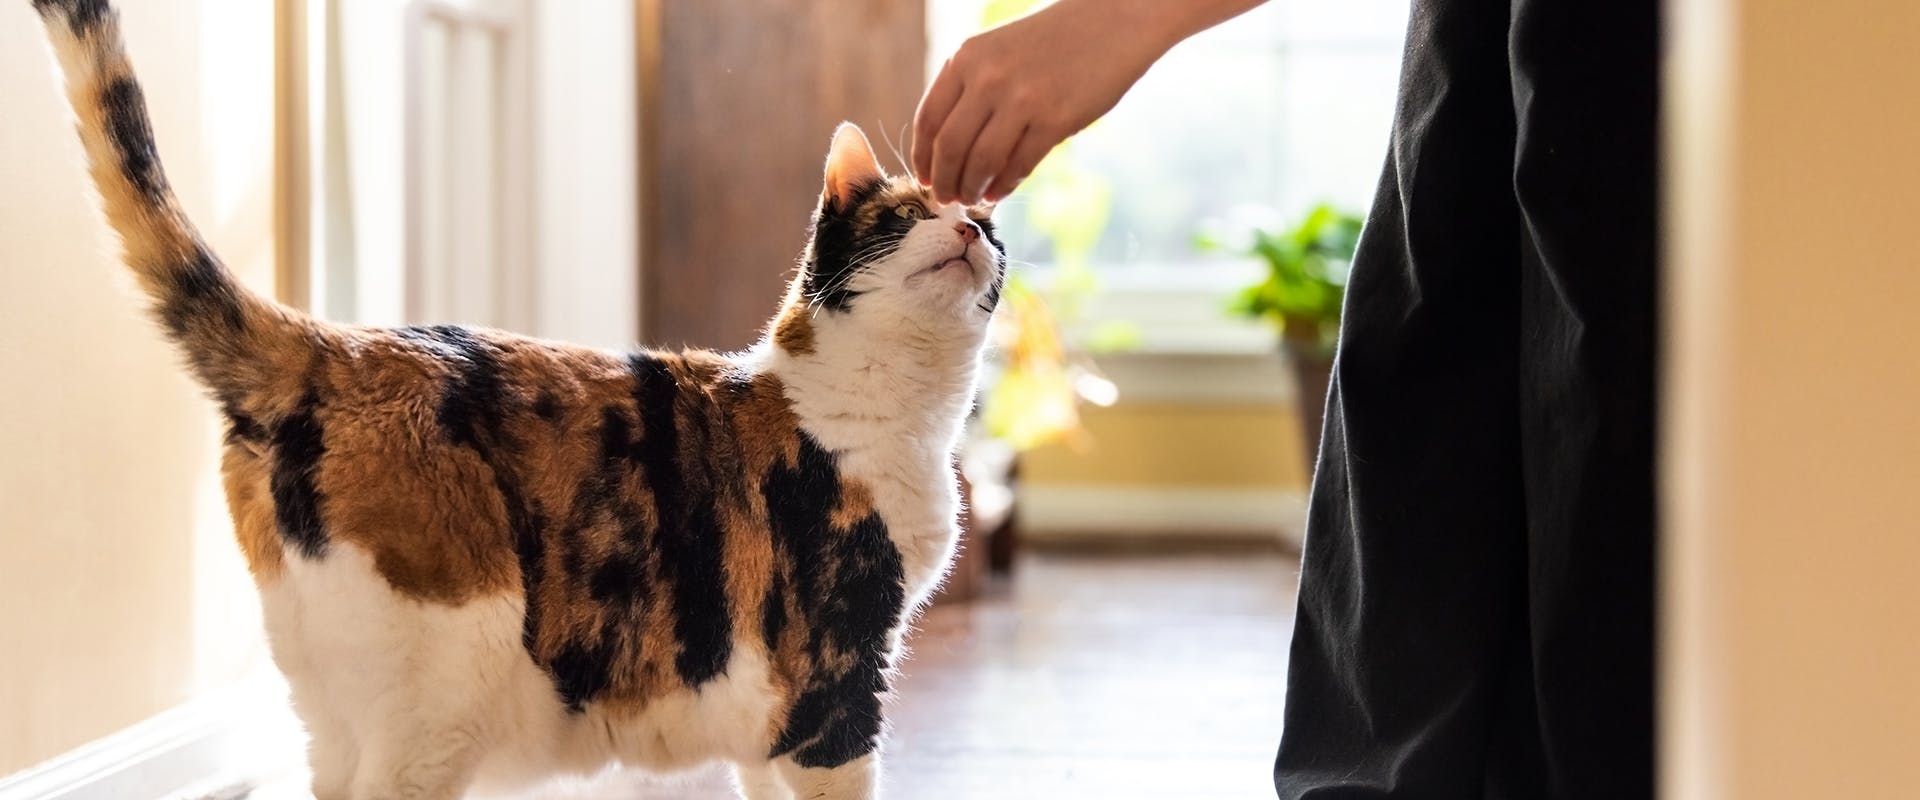 A person giving a treat to a cat